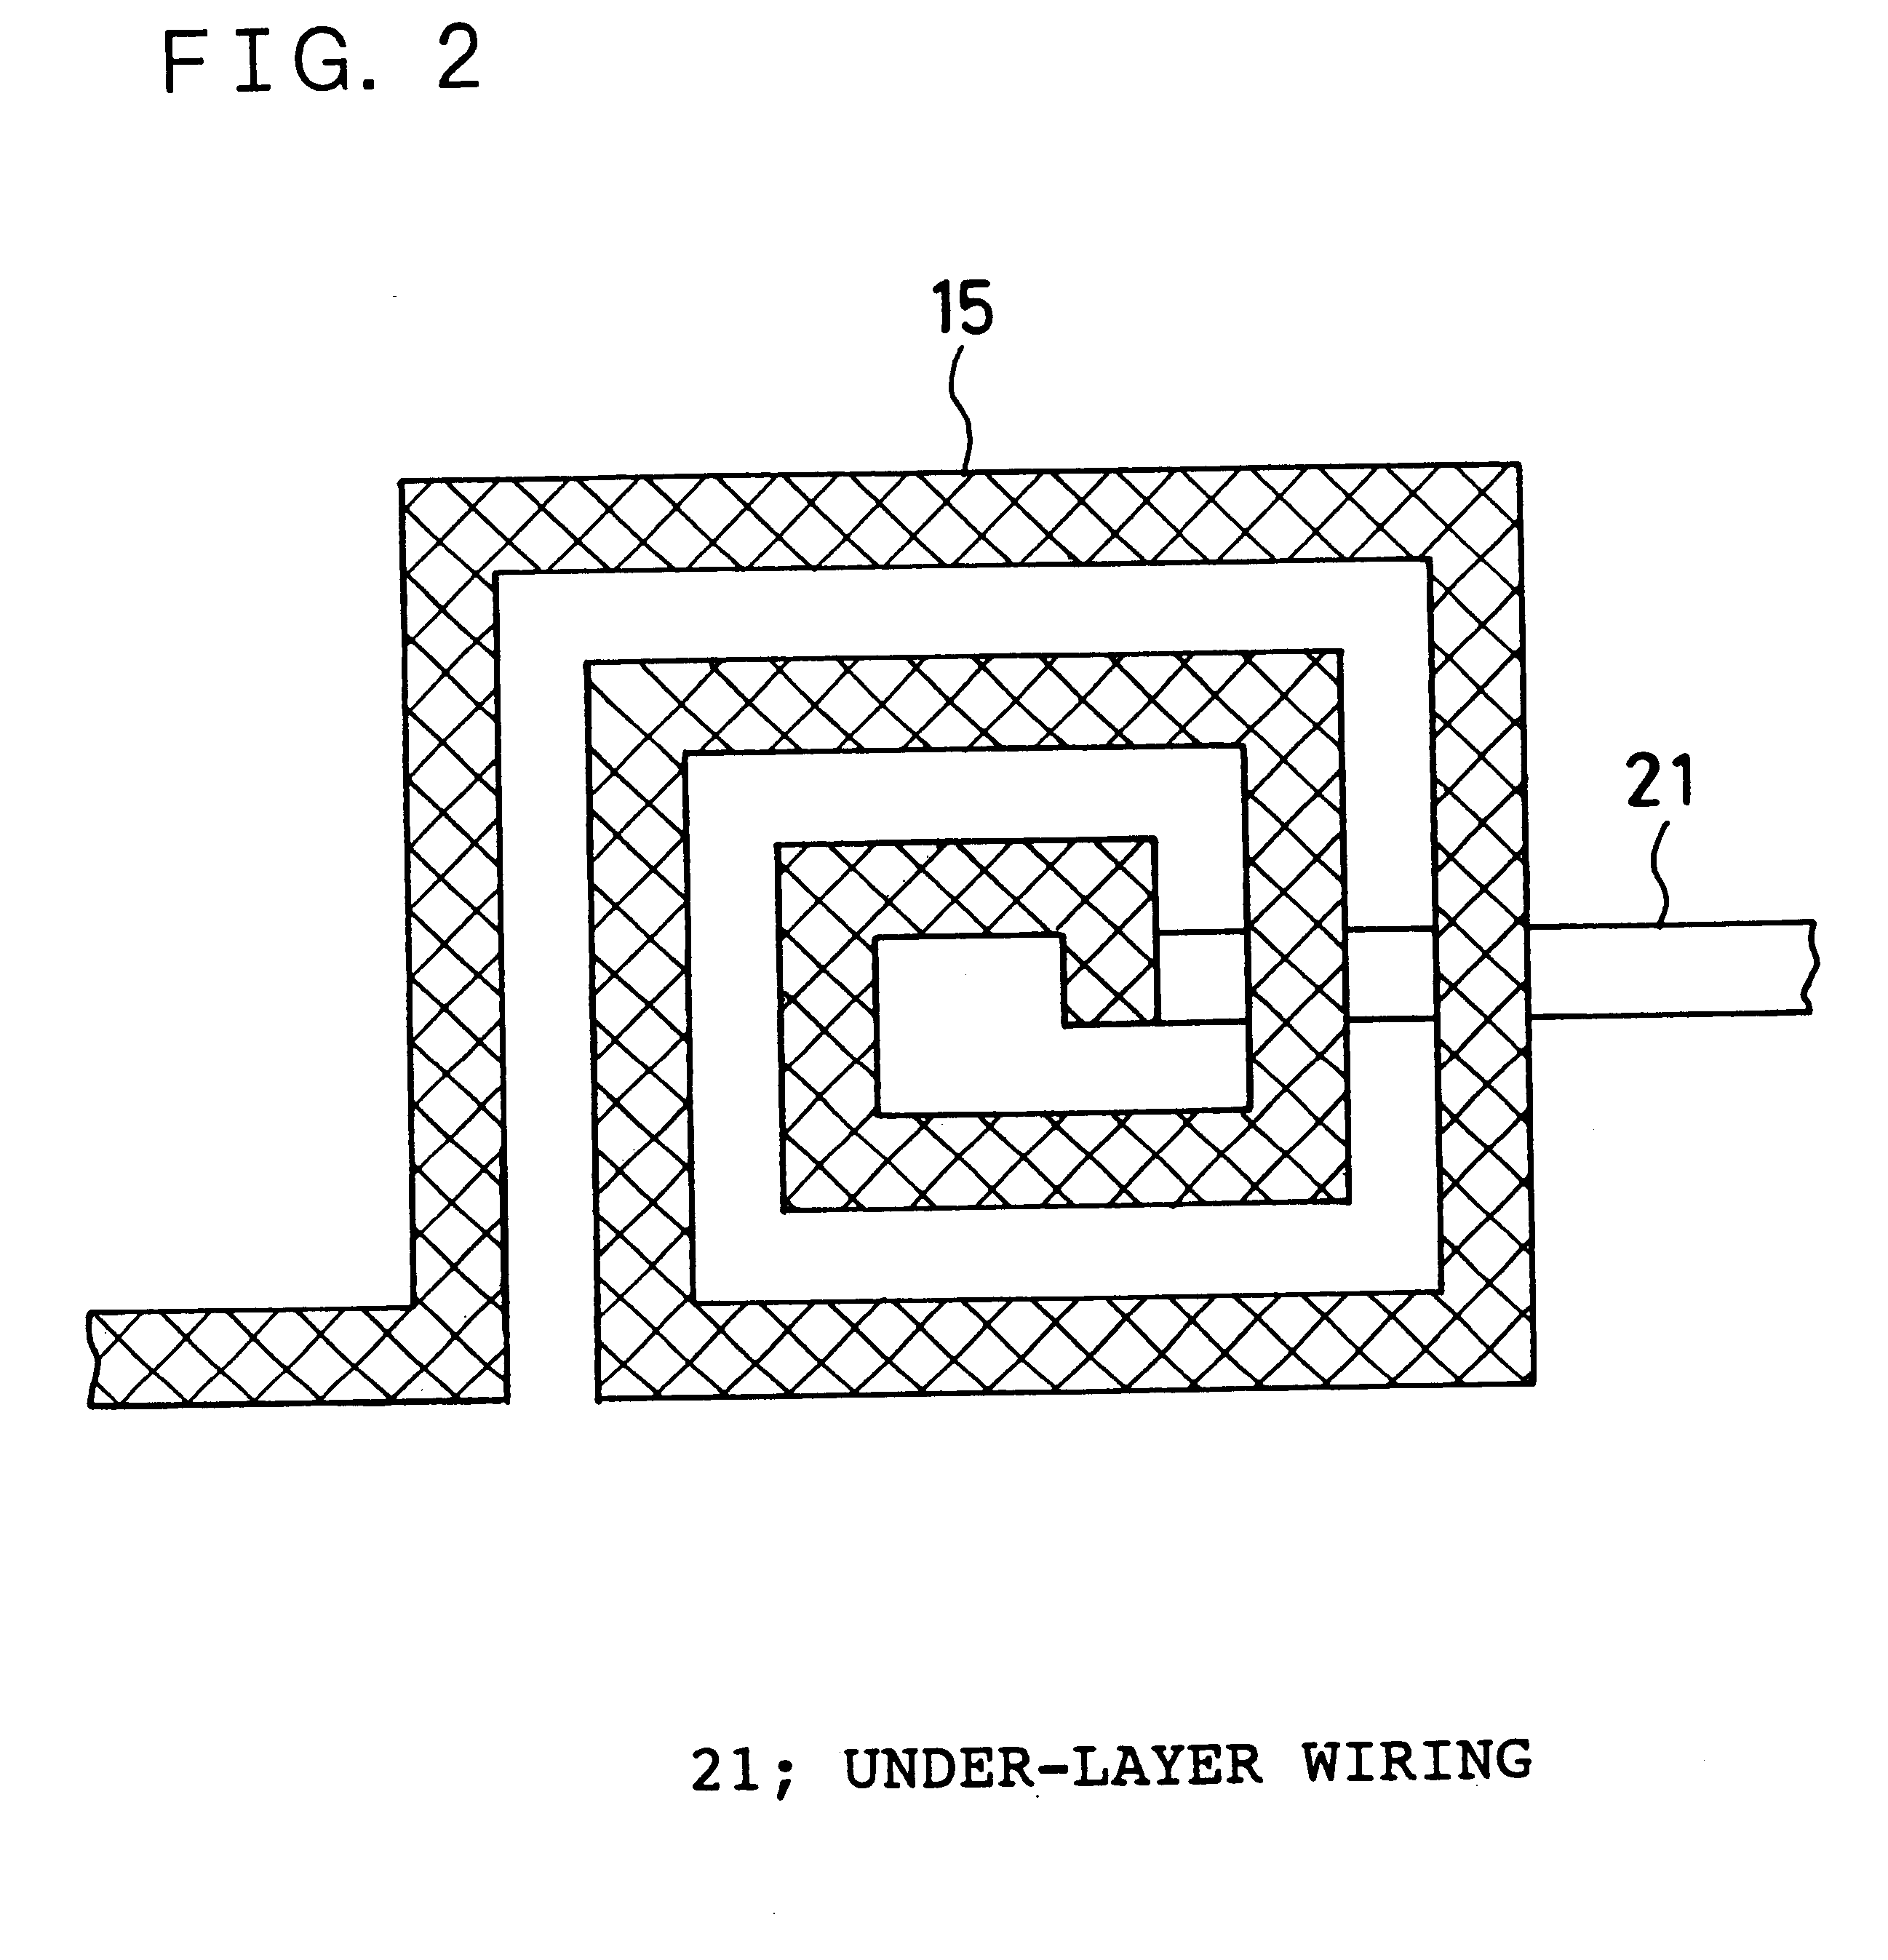 Semiconductor device having micro-wires designed for reduced capacitive coupling